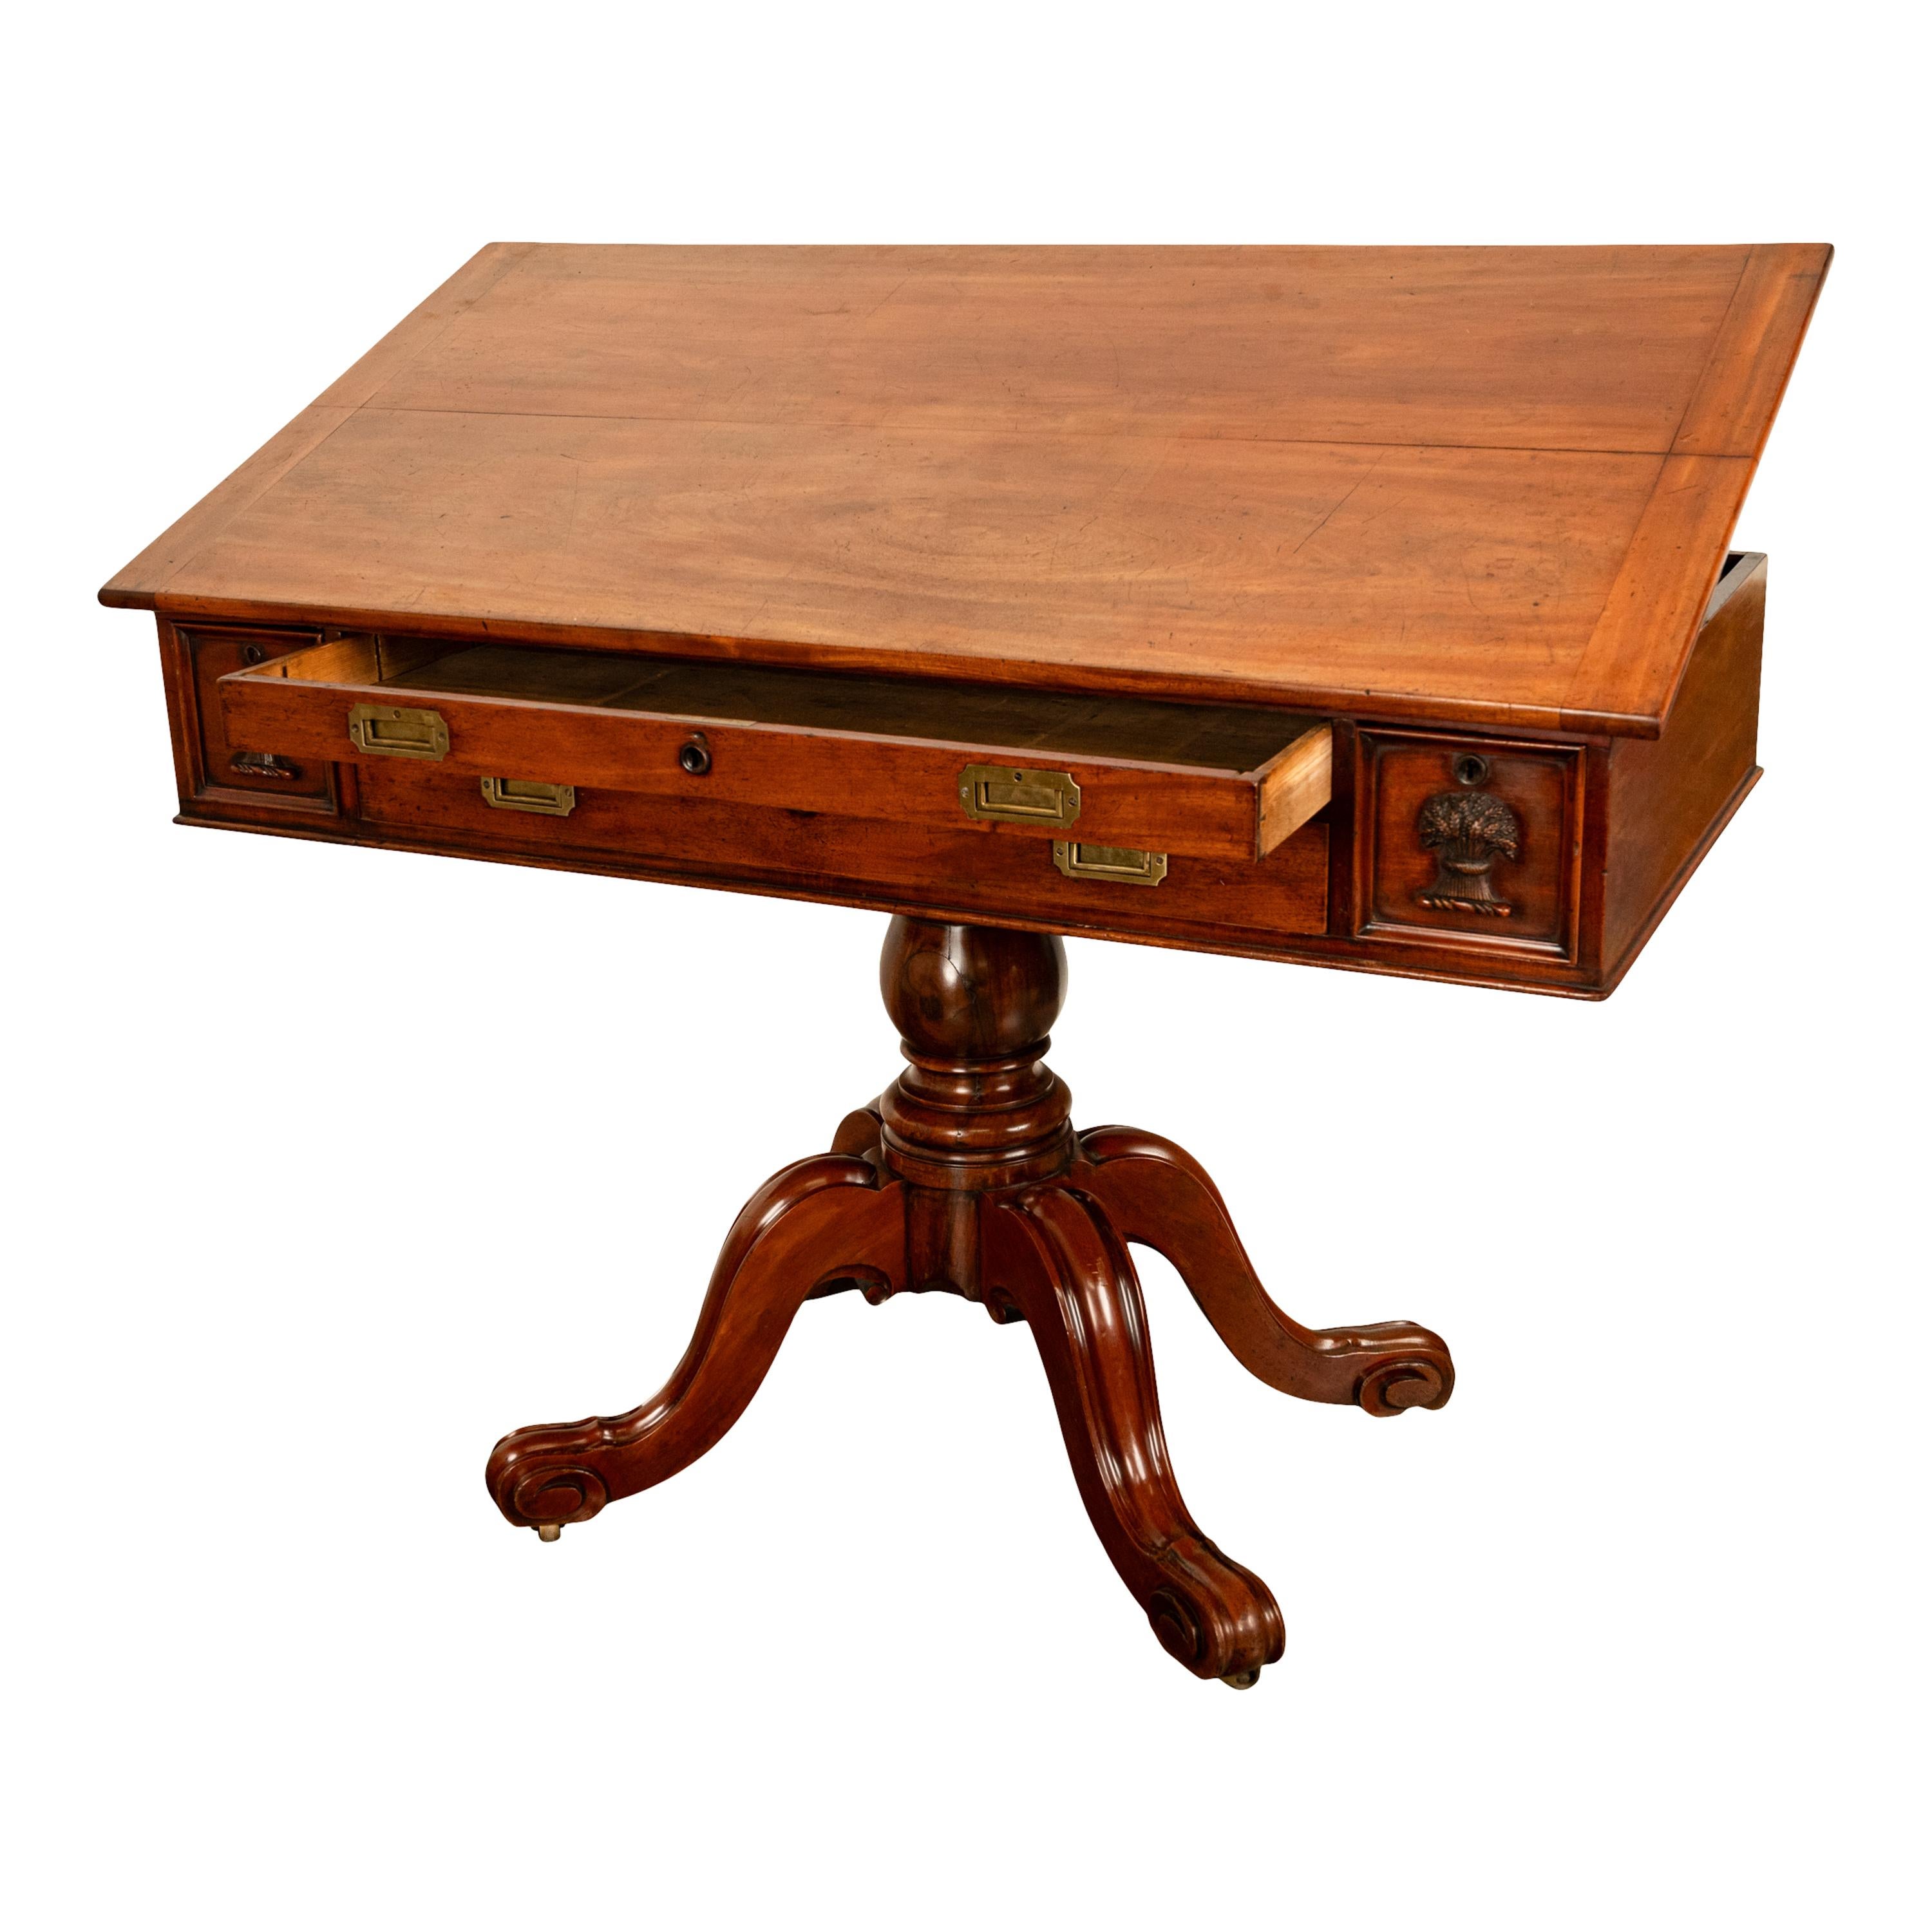 Victorian Antique 19th Century Architect's Mahogany Pedestal Desk Drafting Table 1870 For Sale